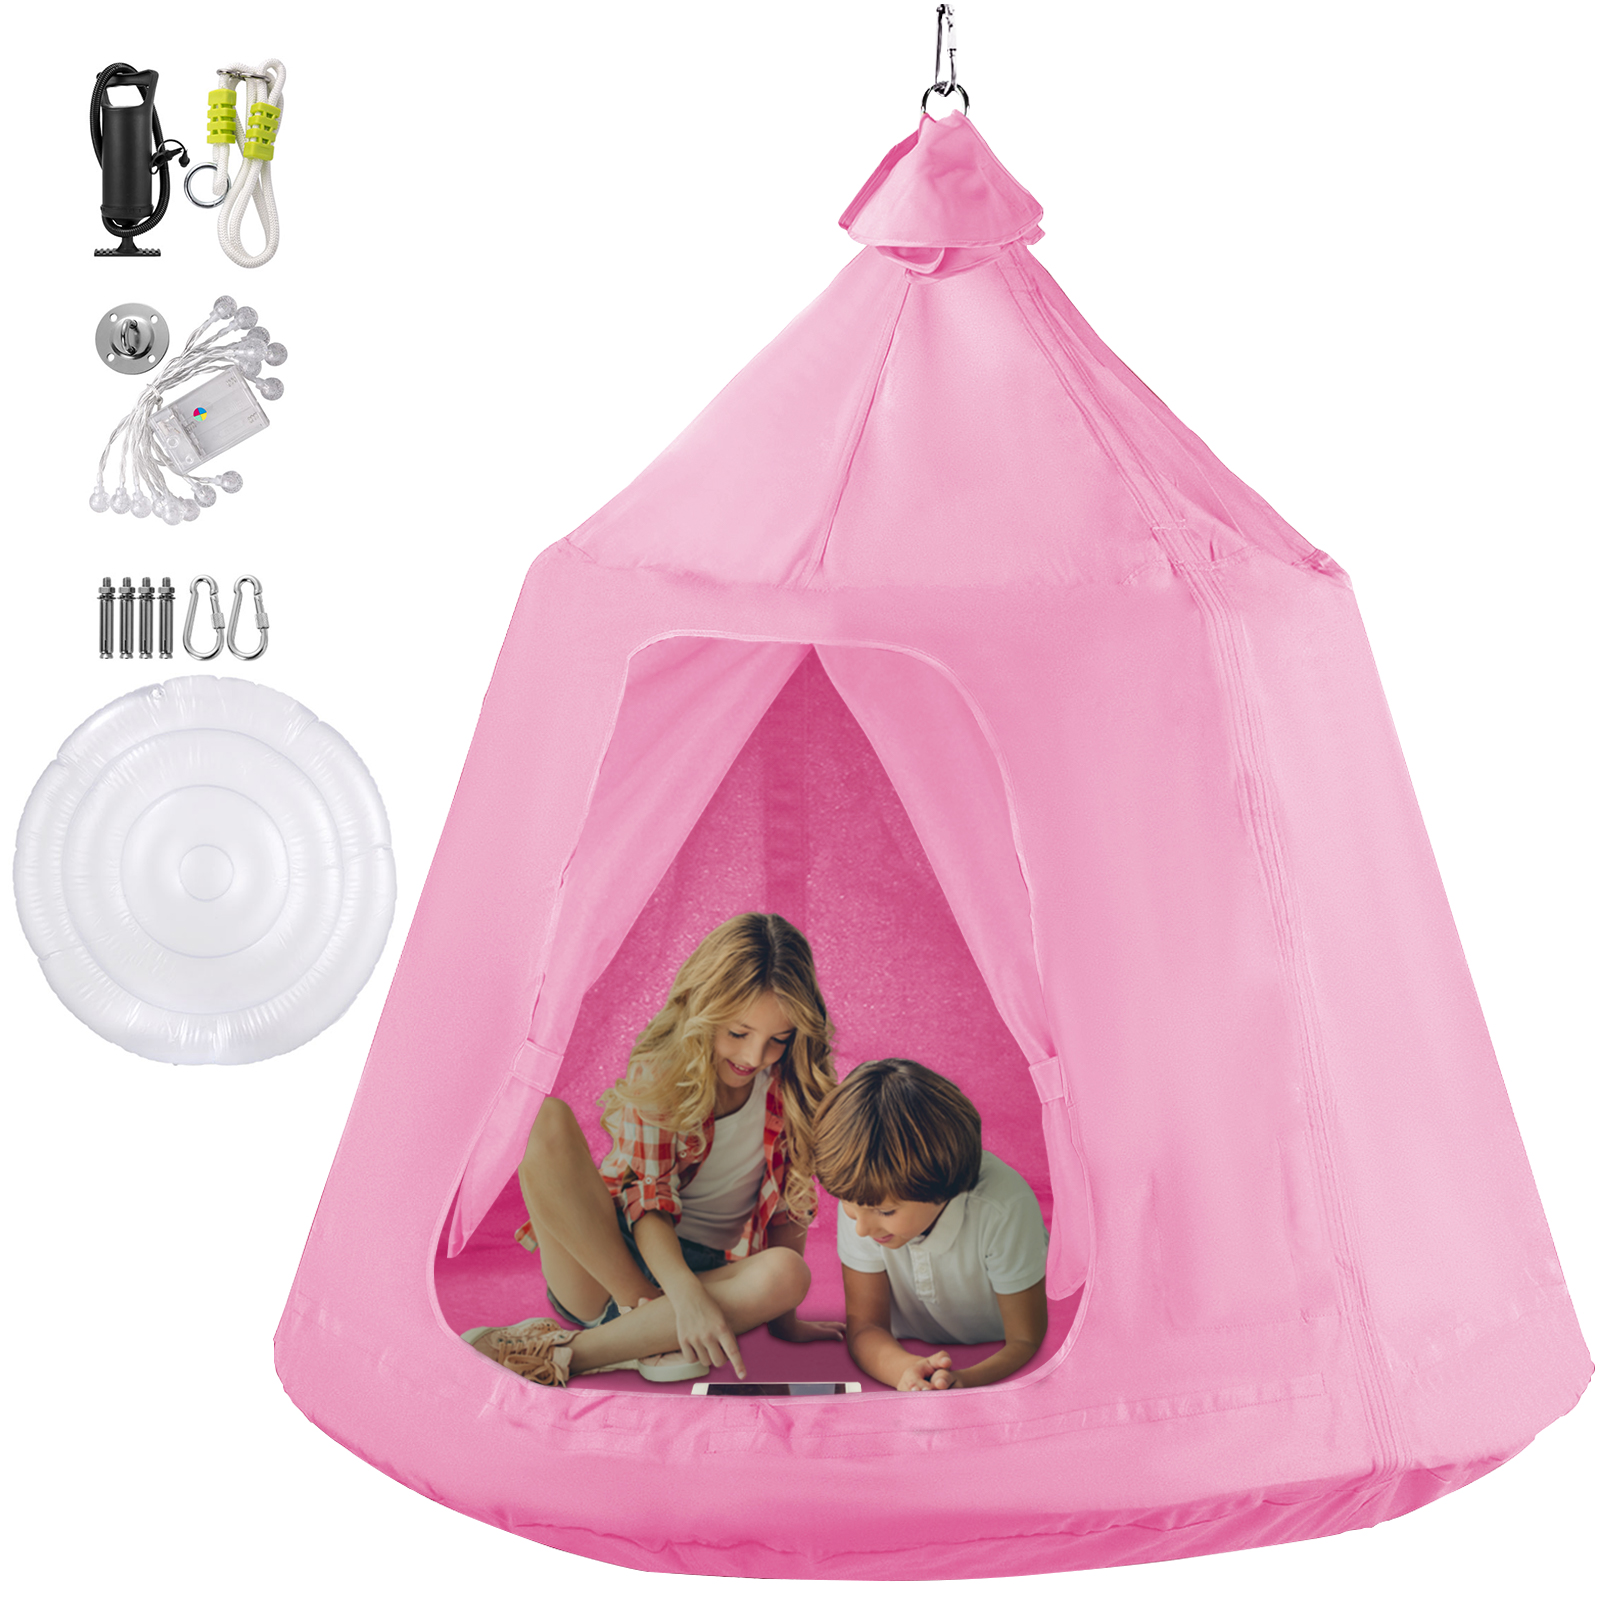 Pink Ropes Best Choice Products Kids Indoor & Outdoor Hanging Hammock Swing Tent Set w/Inflatable Base and Multicolor LED String Lights 